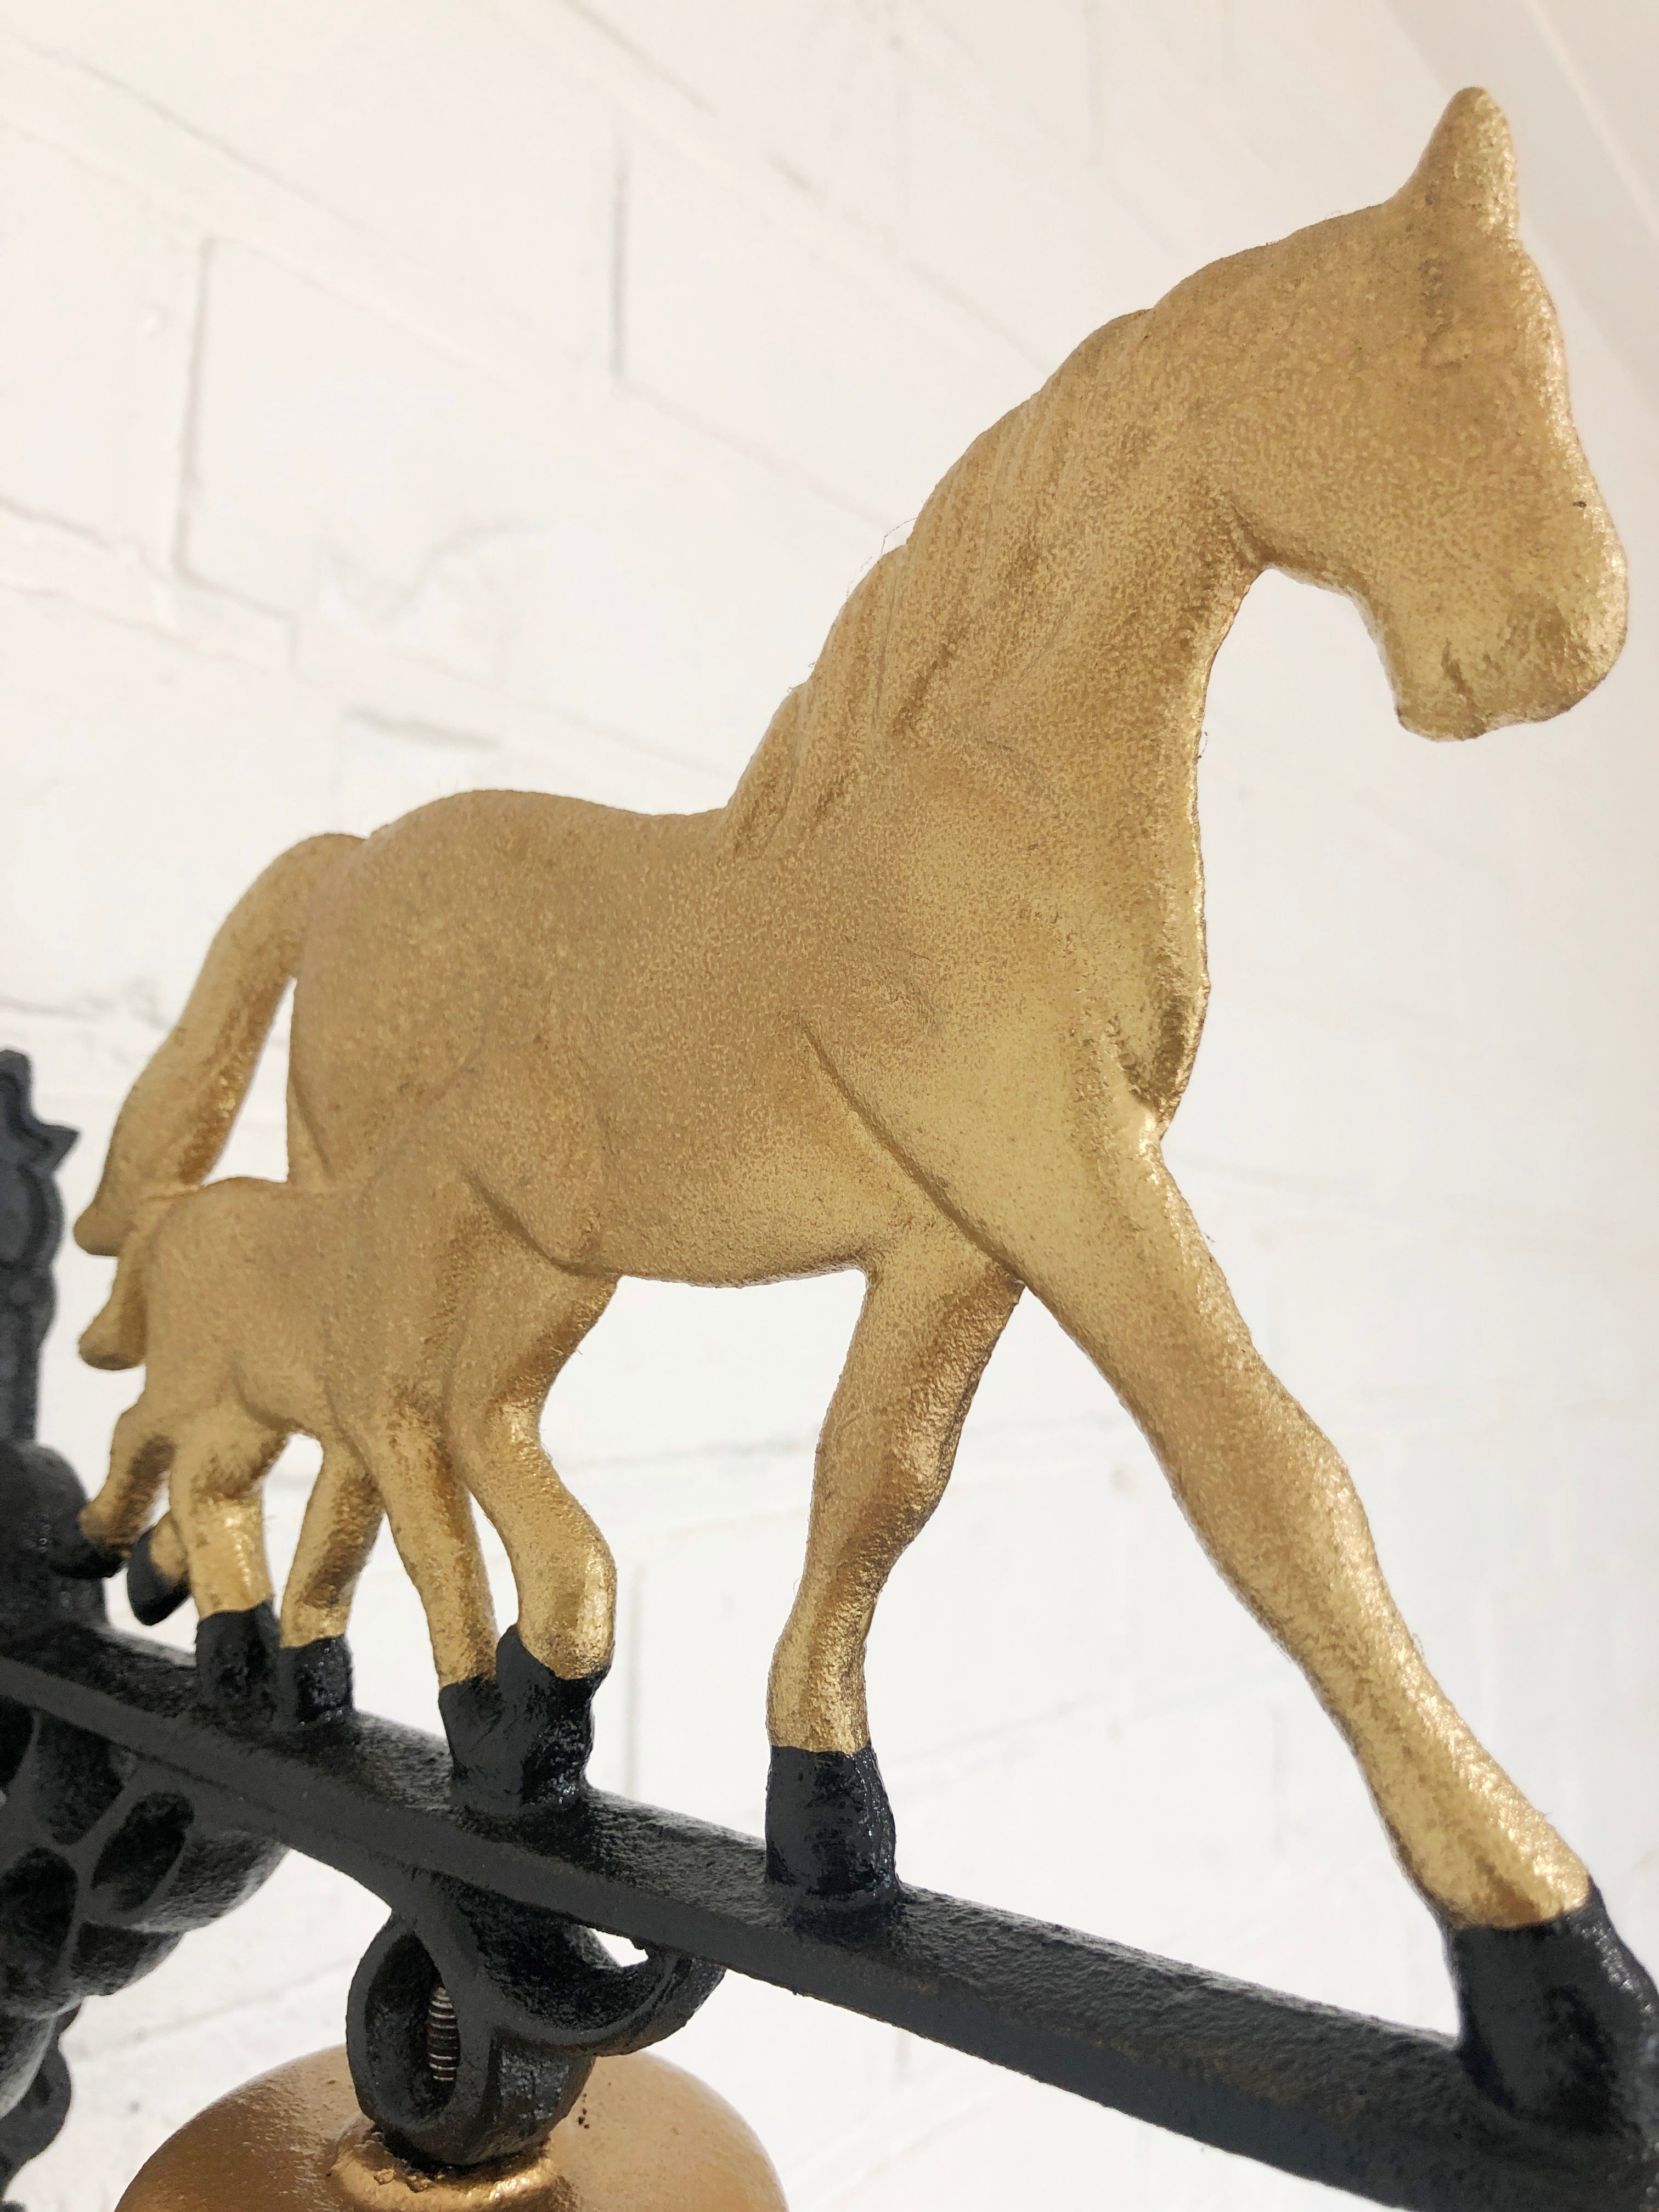 Vintage Cast Iron Wall Mount Horse Bell | eXibit collection